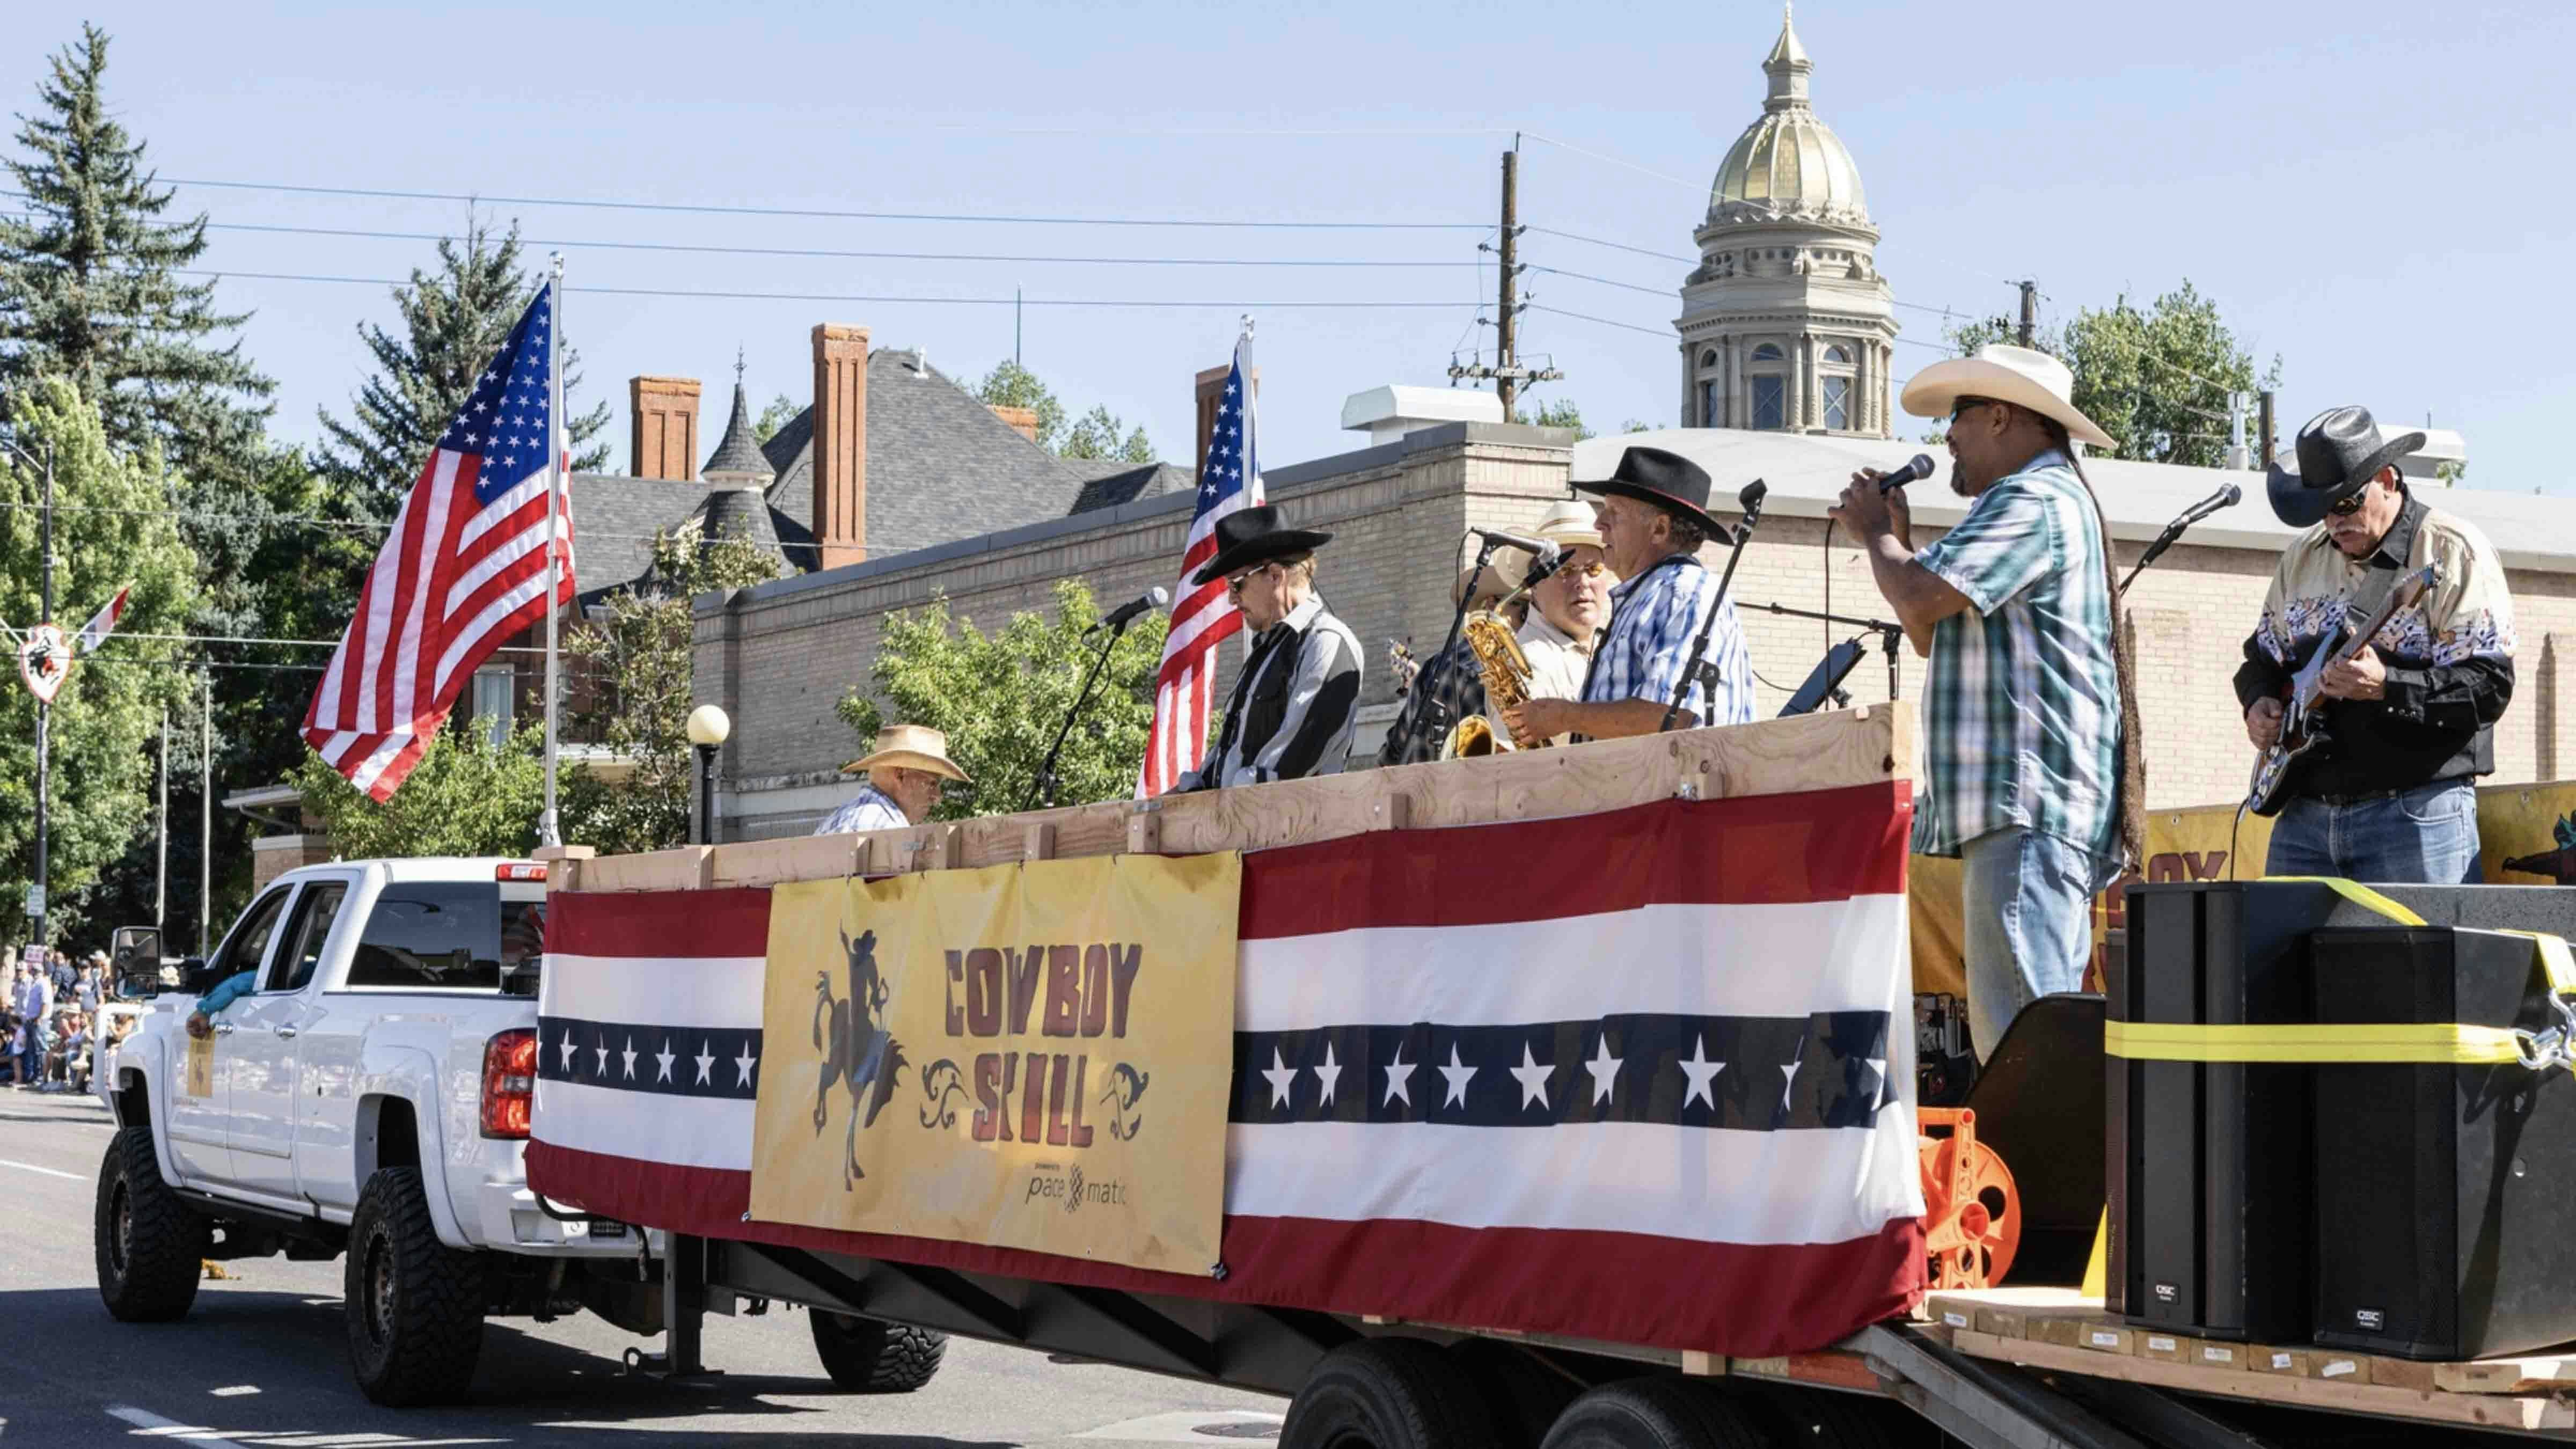 The Nacho Men playing in the Cowboy Skill float in the CFD parade.